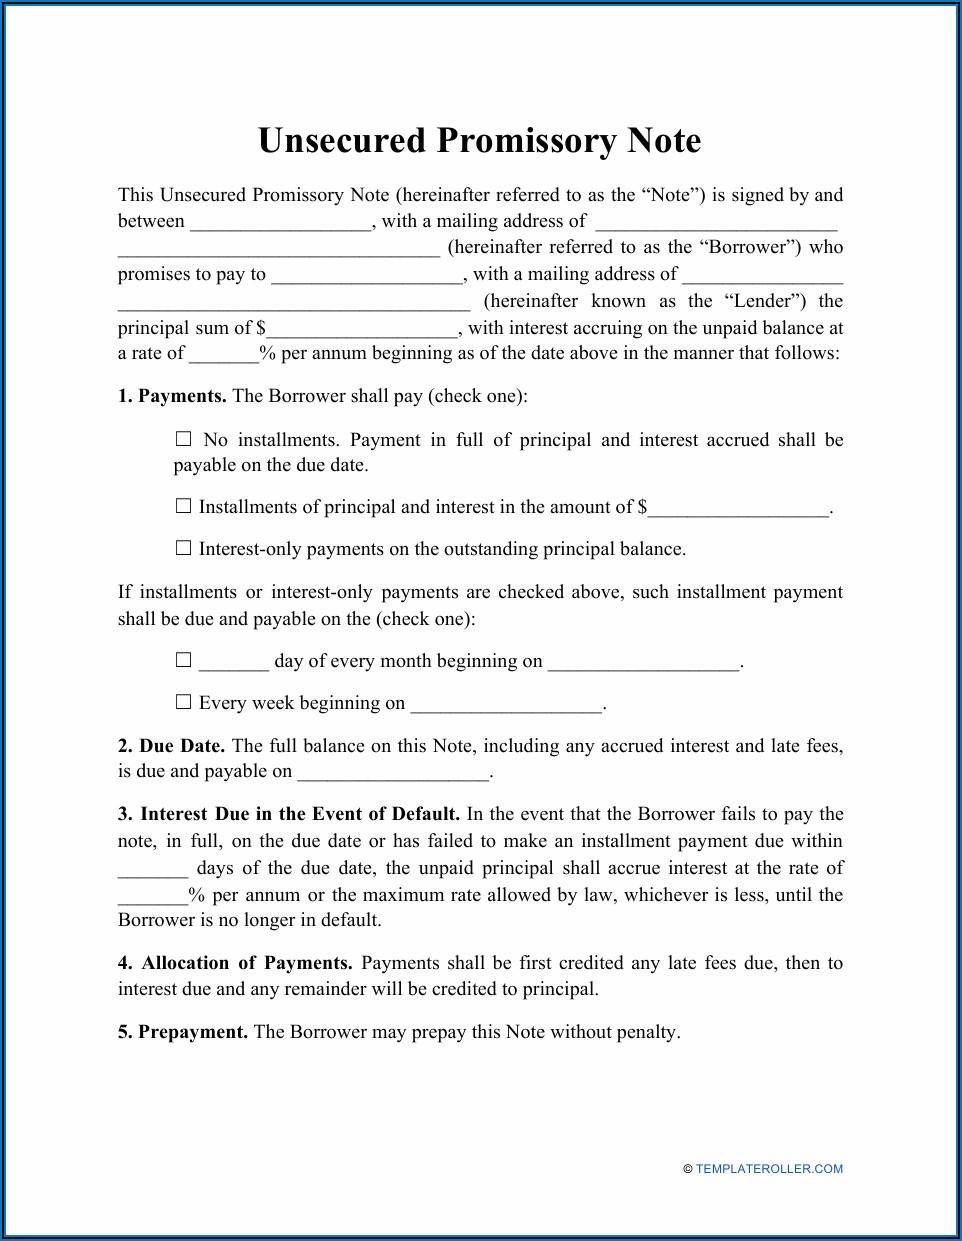 Unsecured Promissory Note Template Washington State